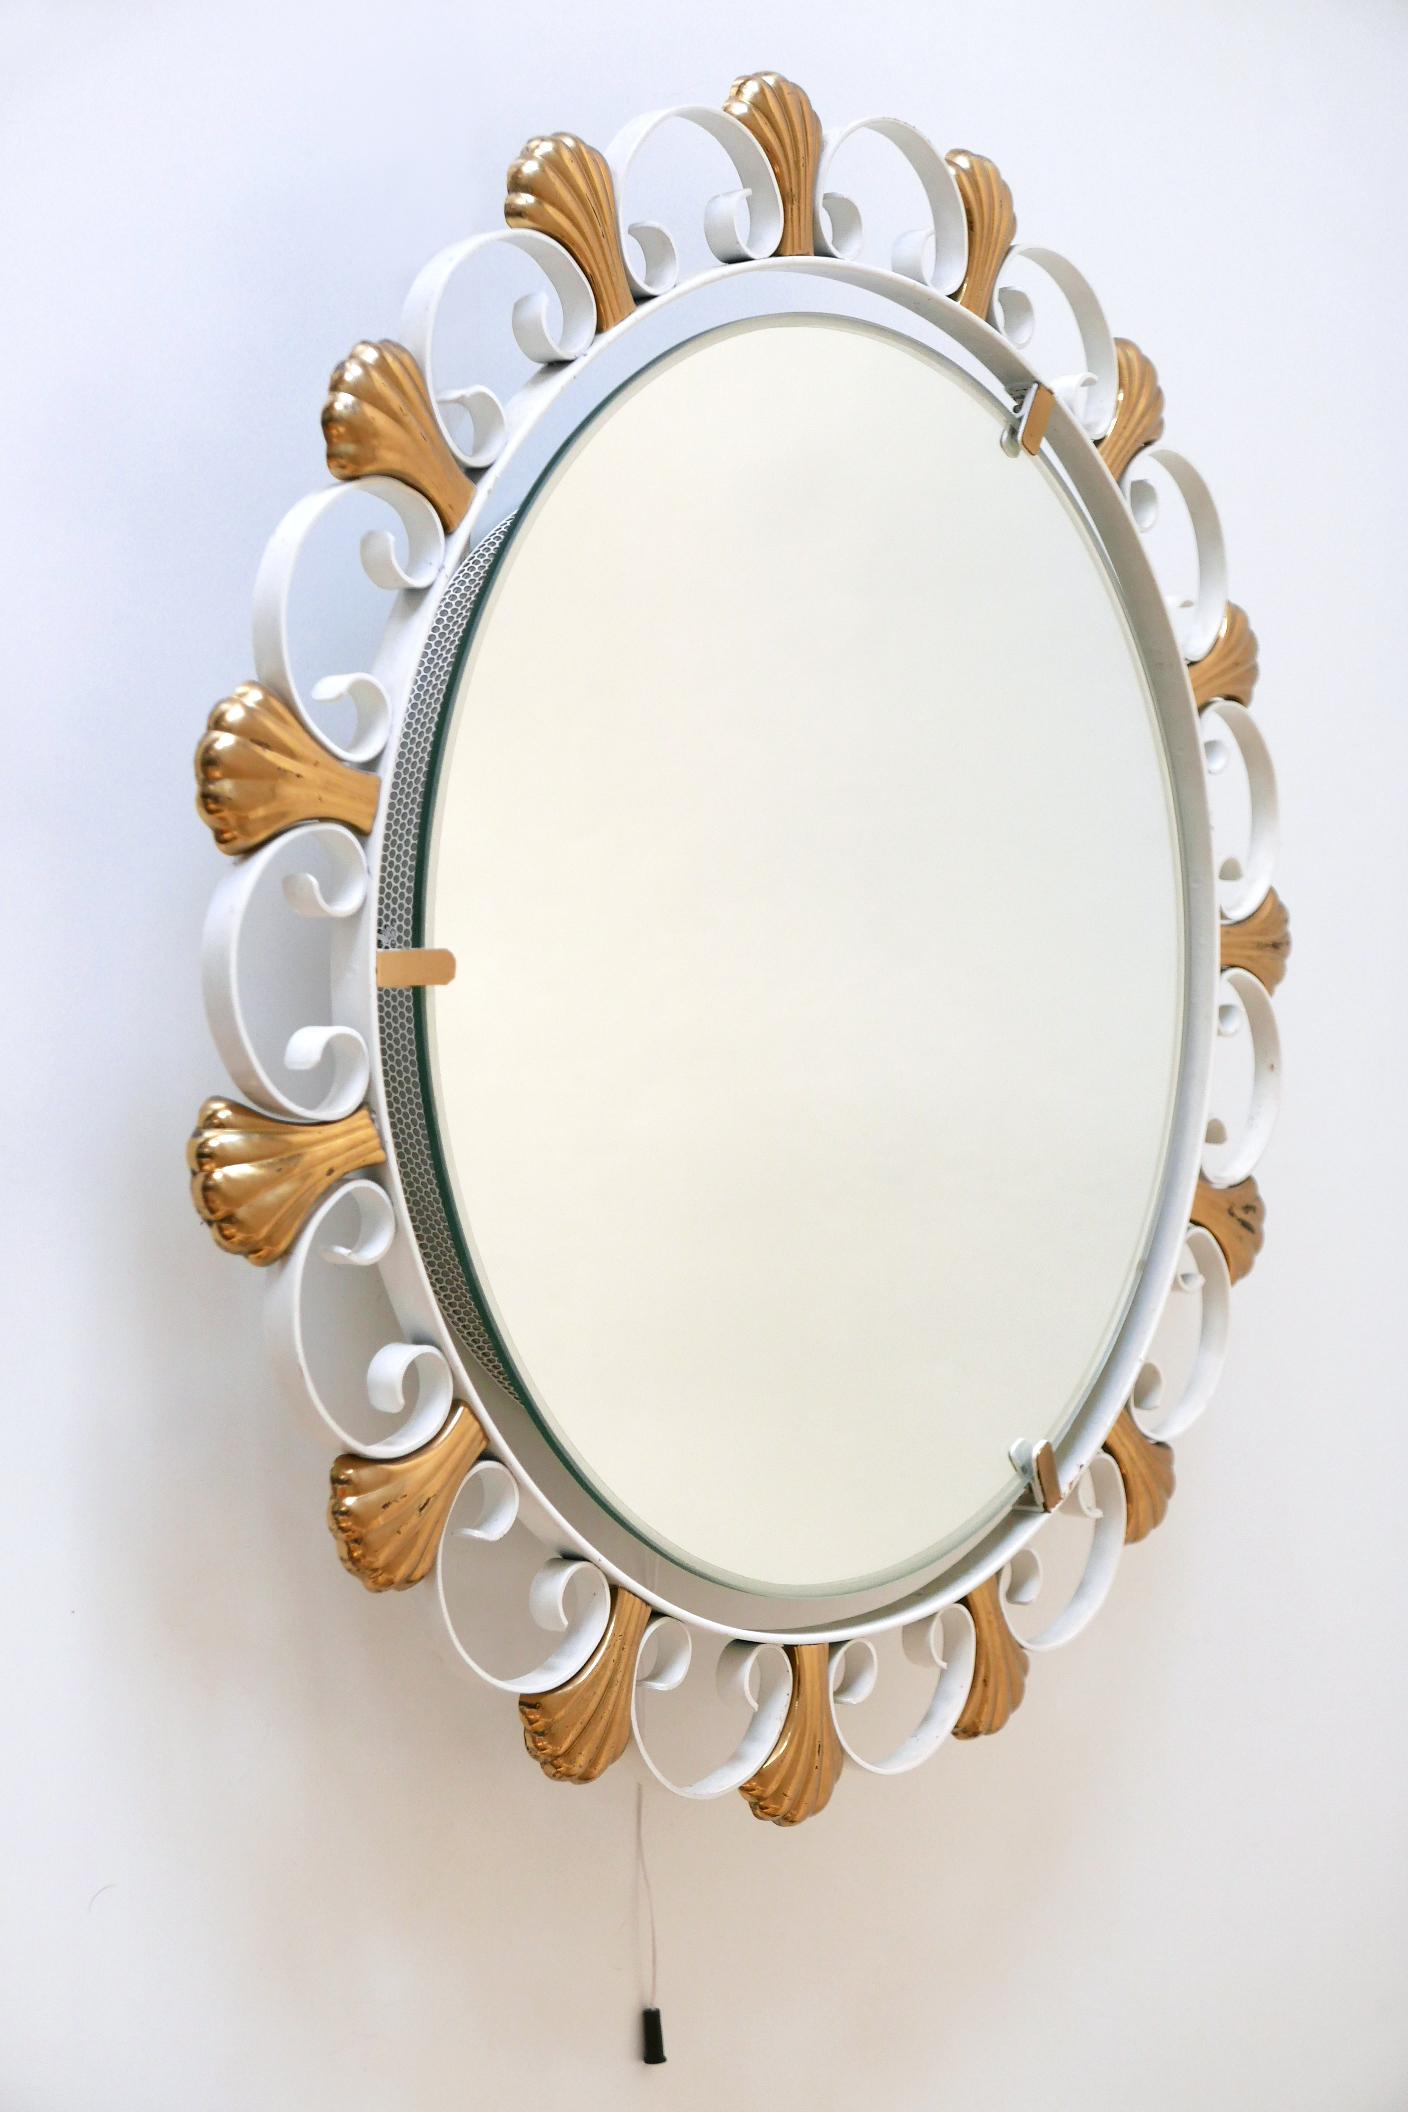 Elegant Mid-Century Modern Backlit Wall Mirror by Hillebrand, 1960s, Germany For Sale 3